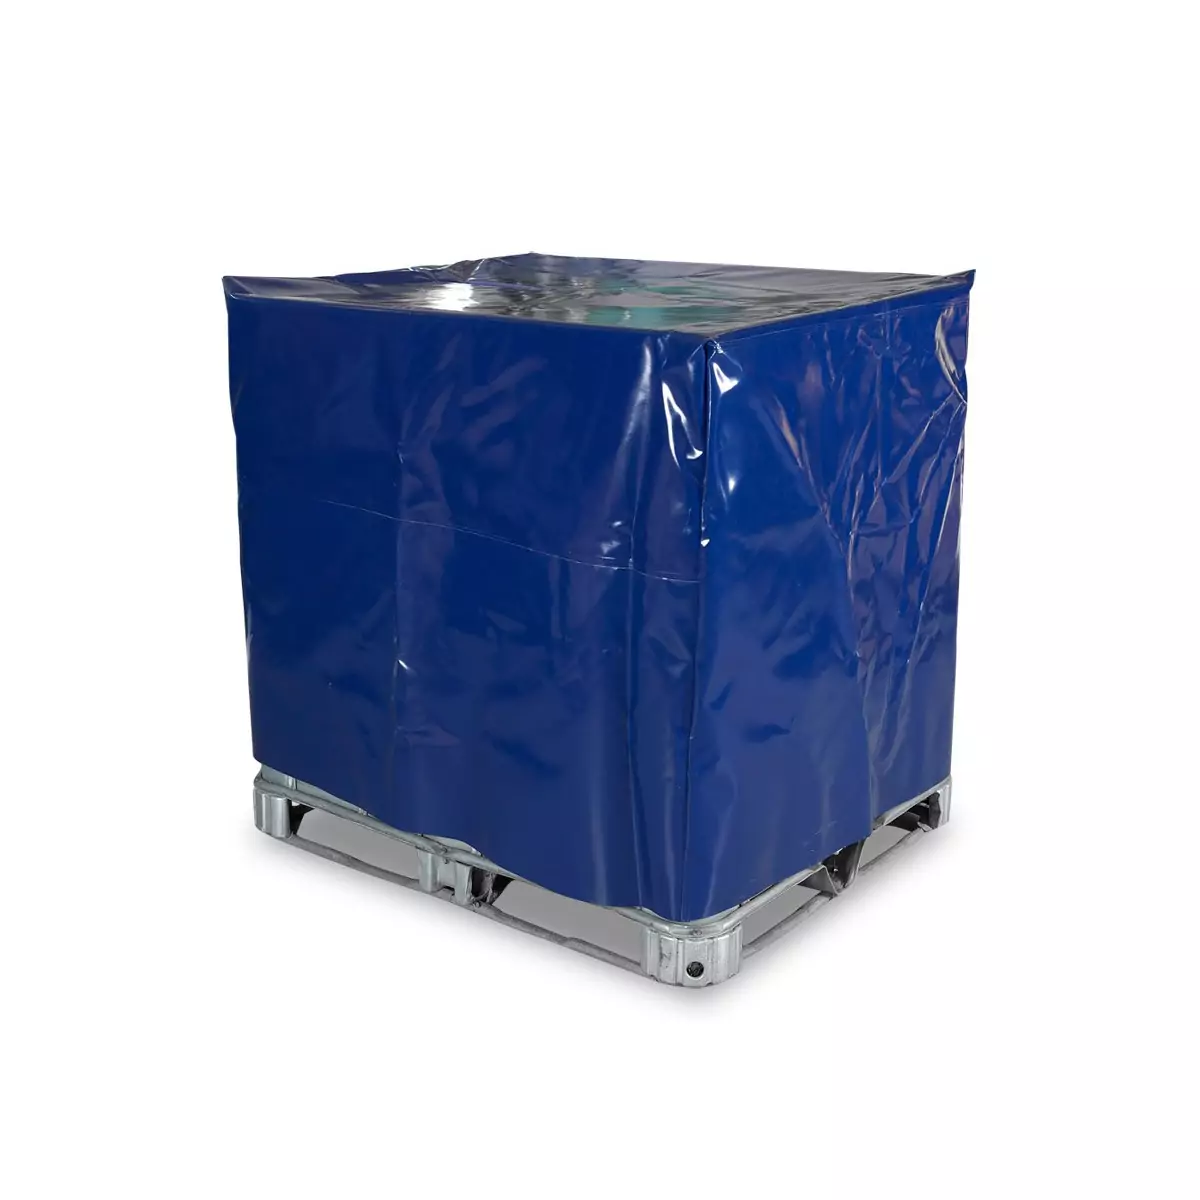 Waterproof Cover for IBC Containers